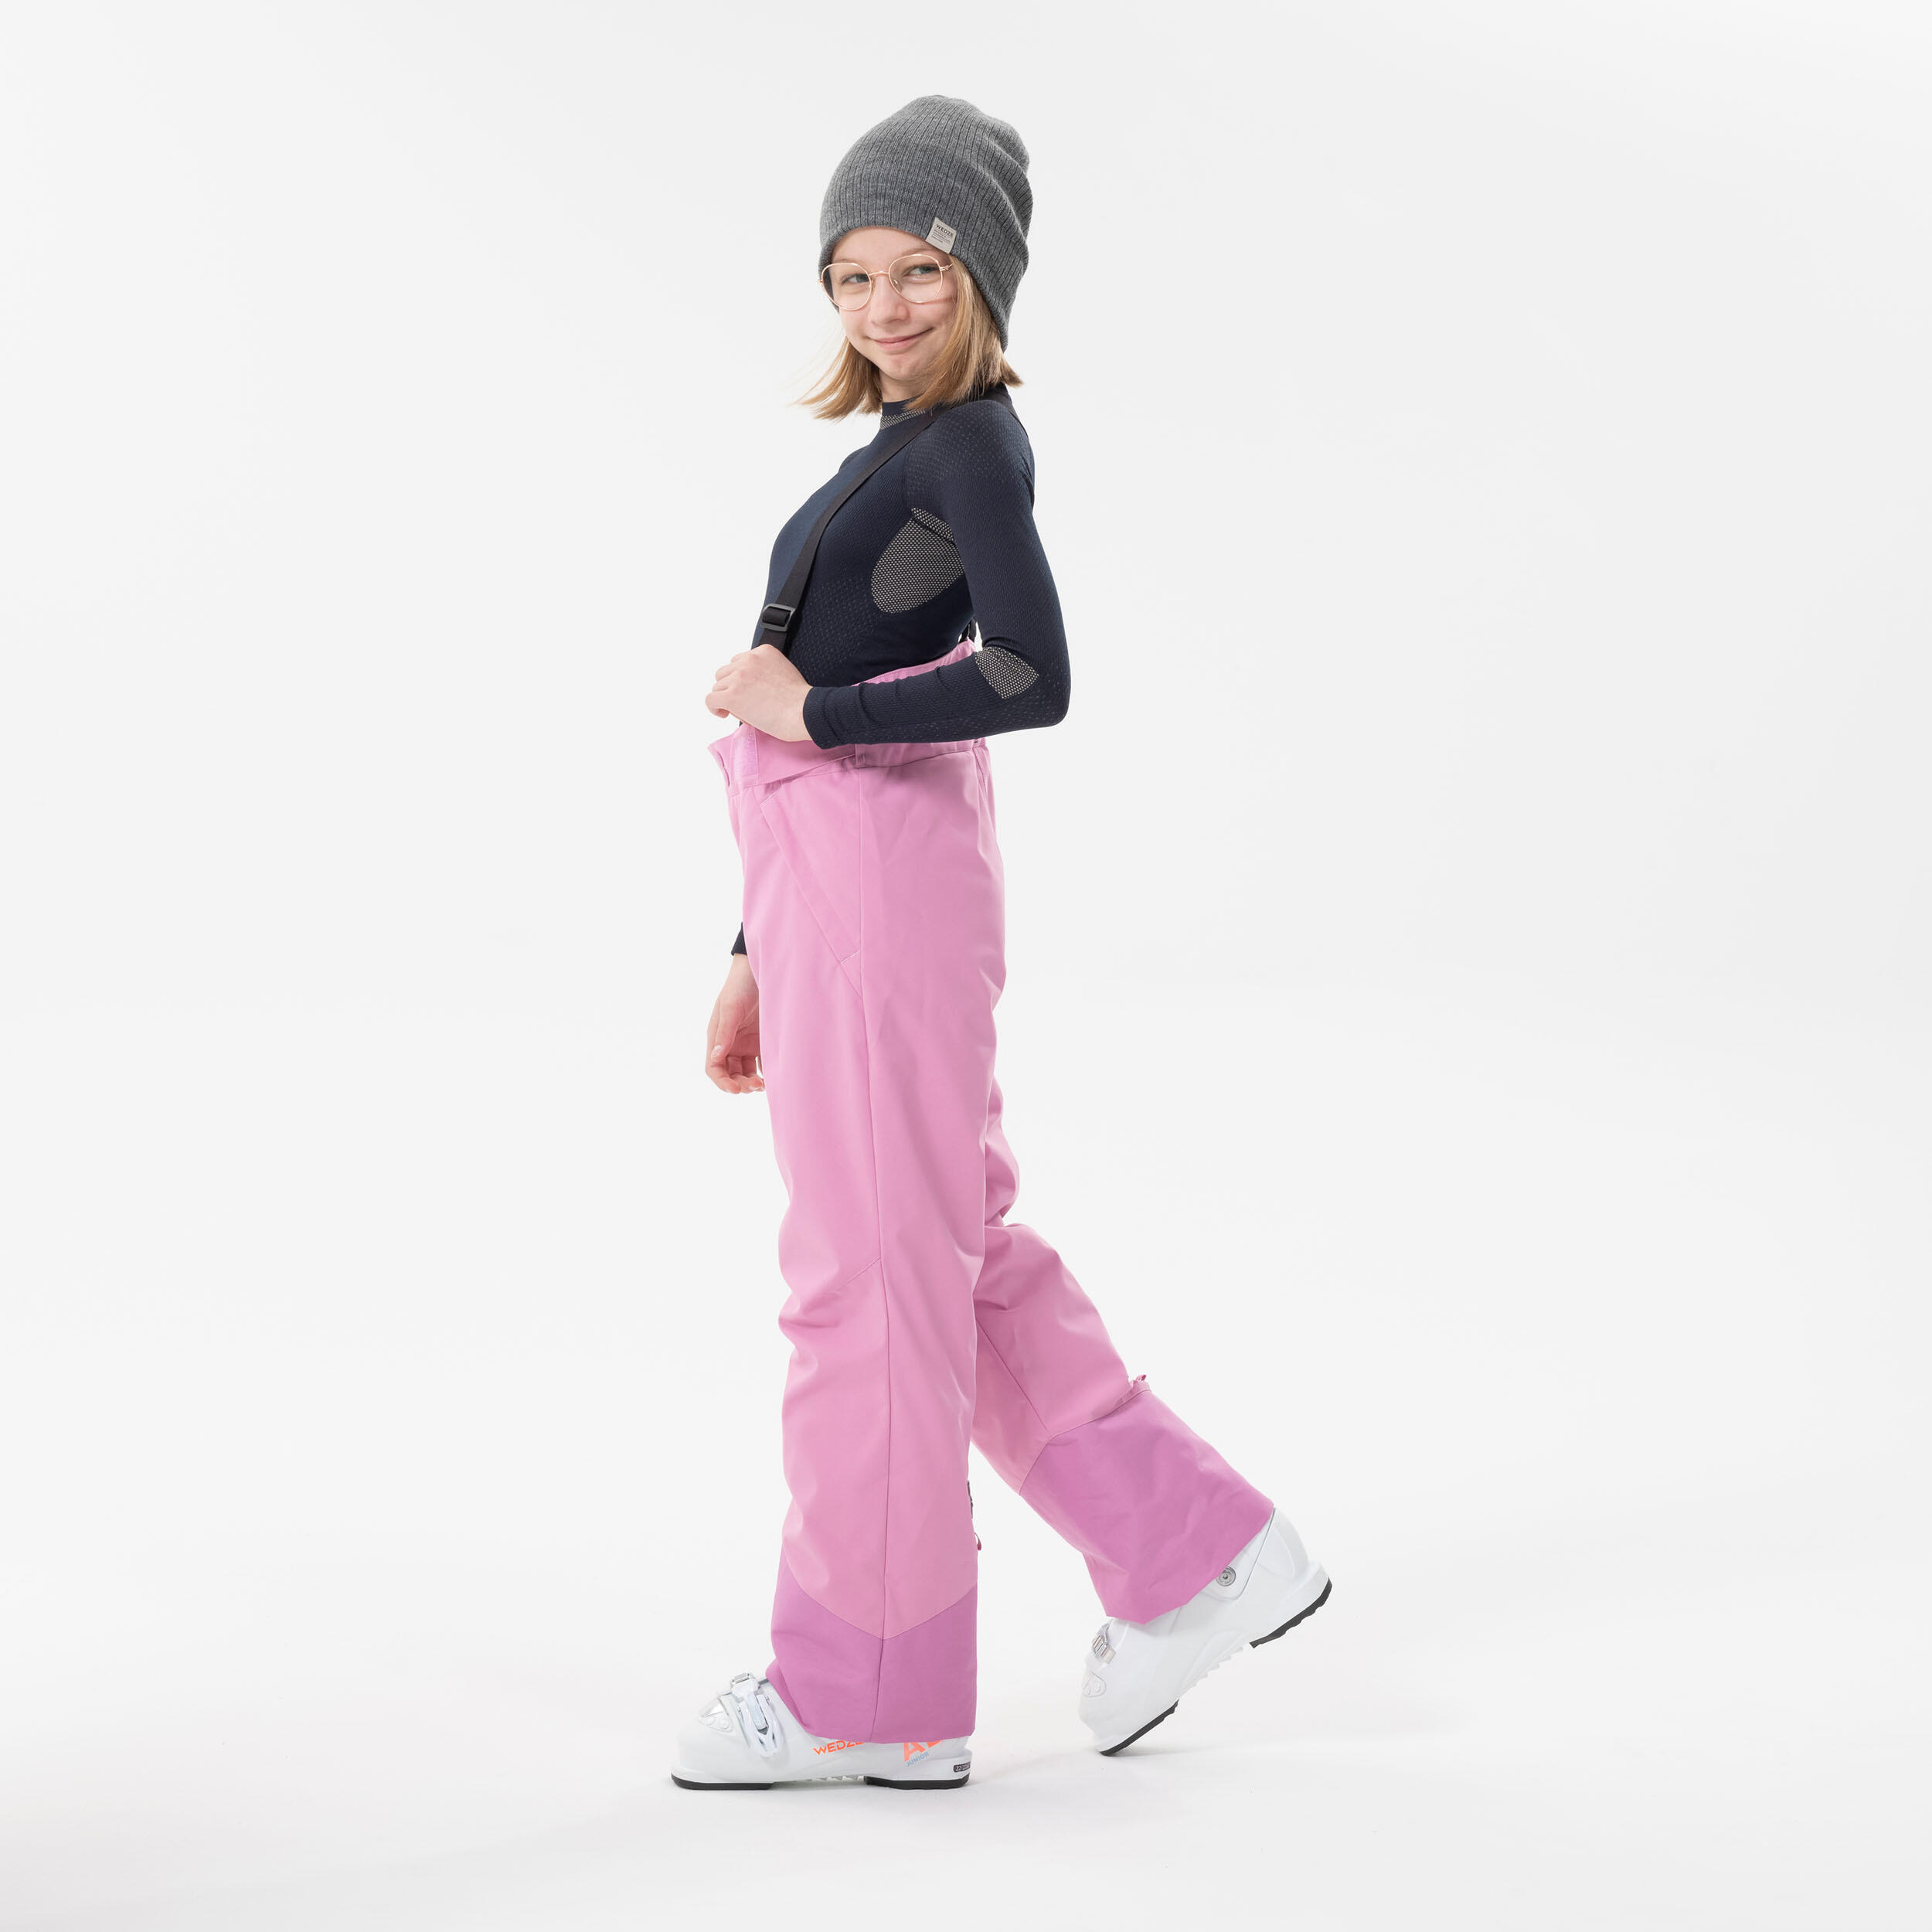 KIDS’ WARM AND WATERPROOF SKI TROUSERS  - 500 PNF - PINK  6/12